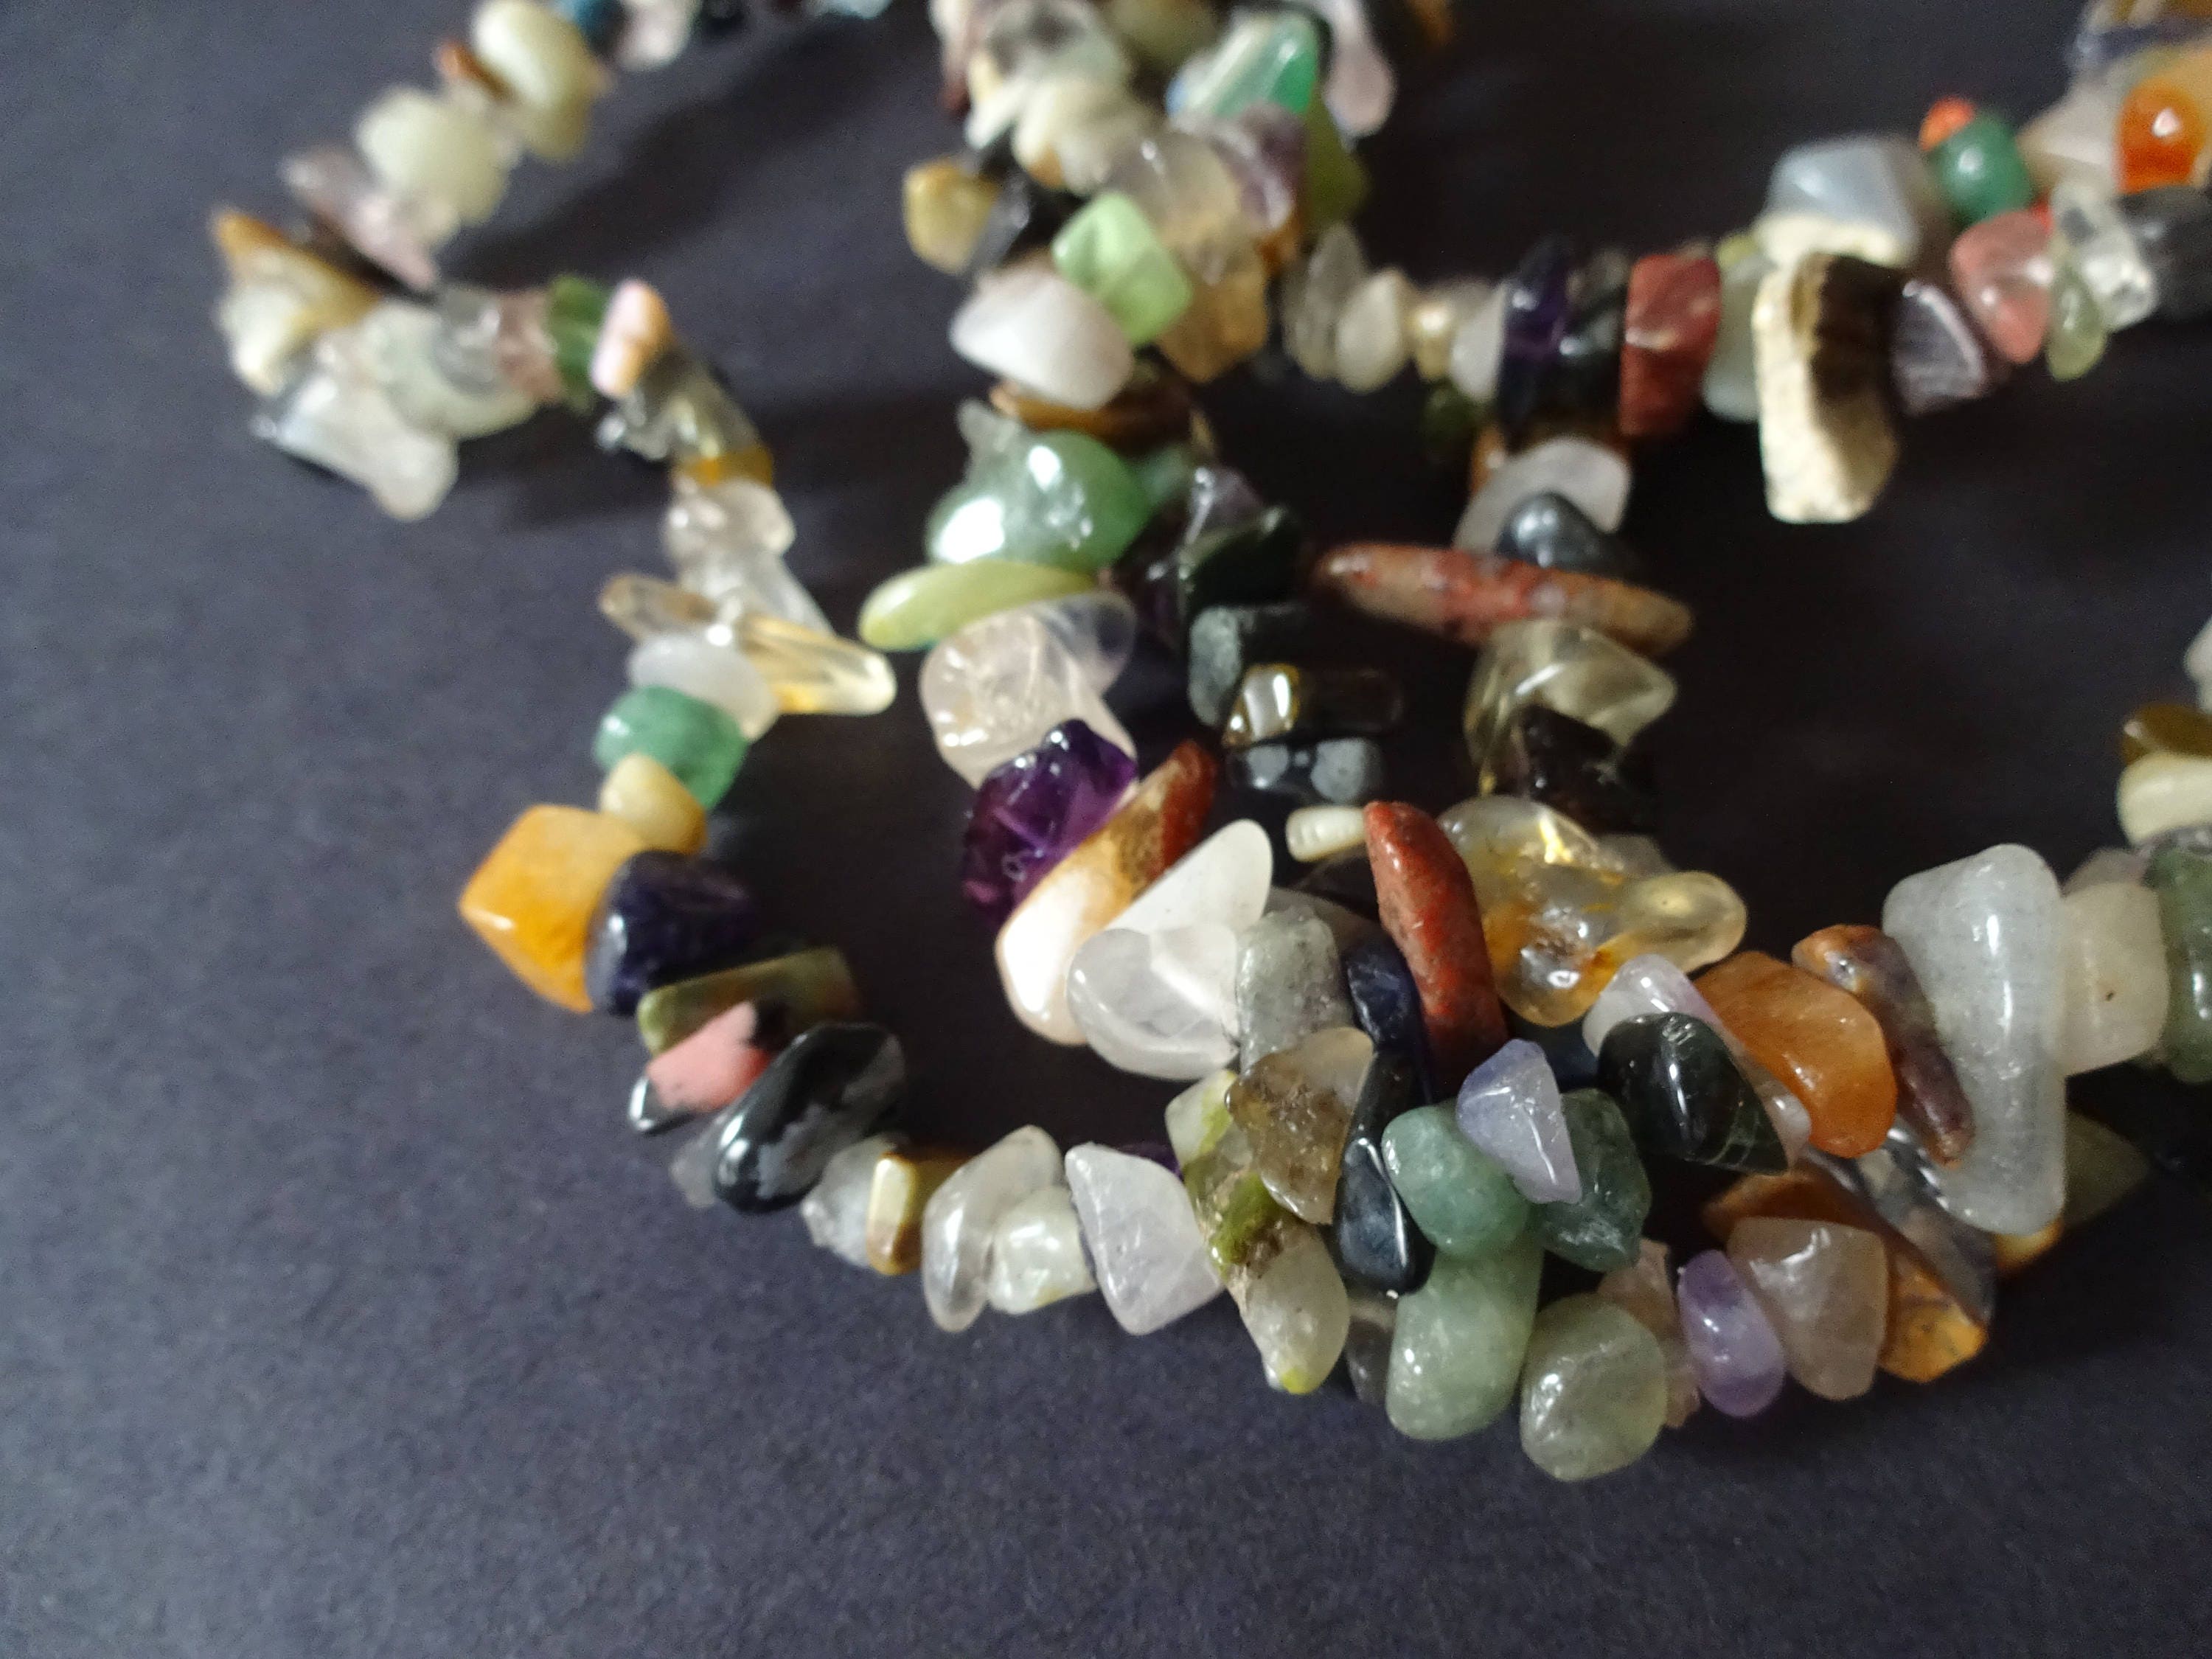 About 250 Mixed Natural Gemstone Beads, 32 Inch Strand, 5-8mm Chip ...